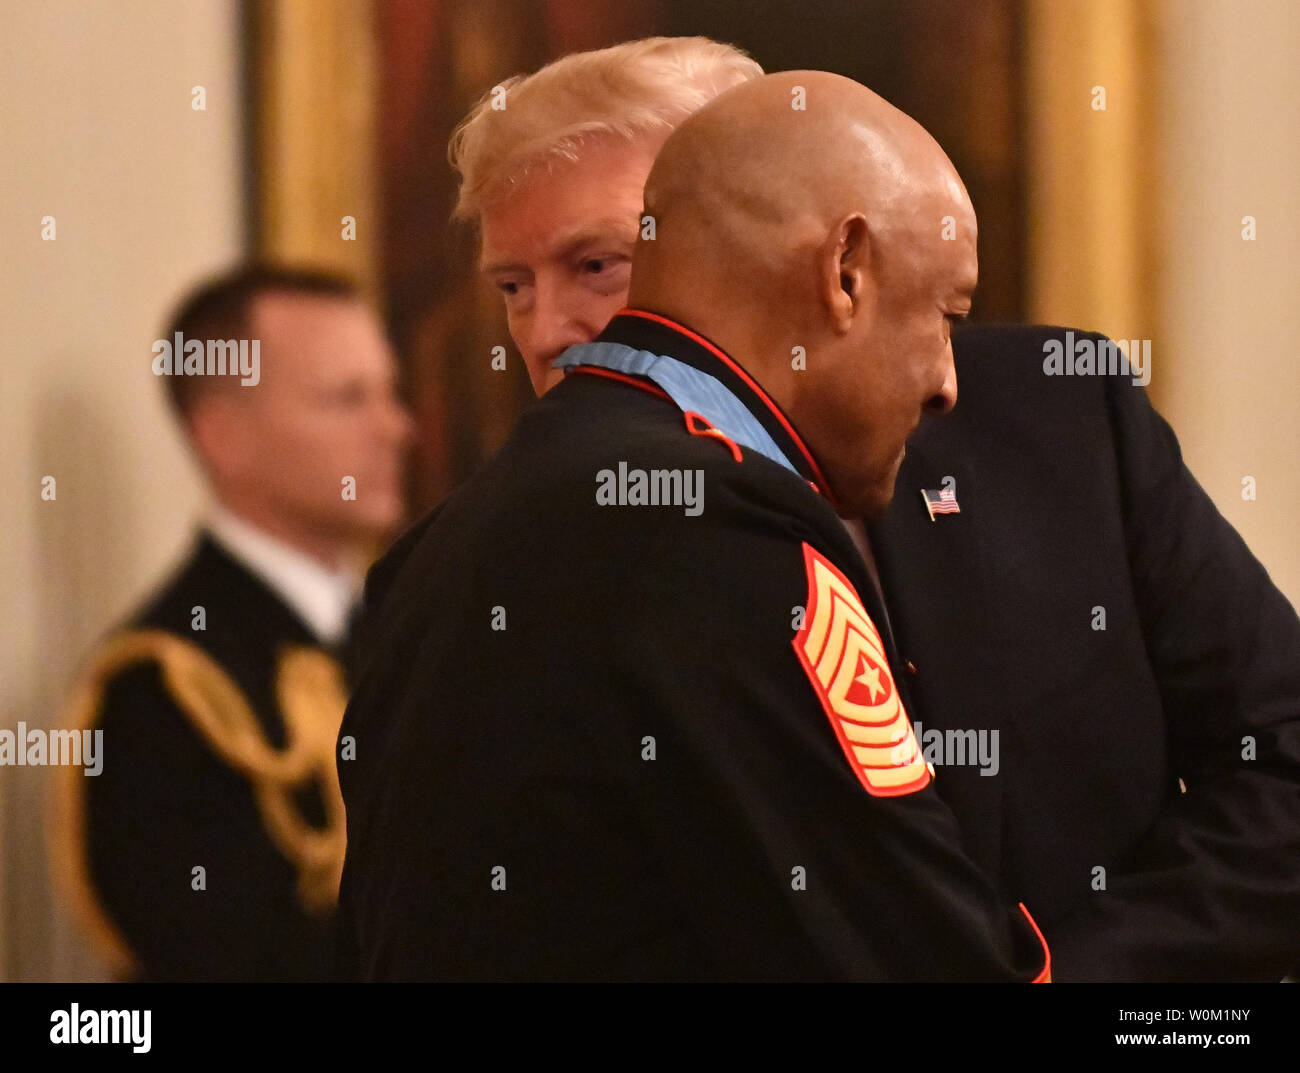 President Donald Trump wispers to Medal of Honor  recipient retired Sgt. Maj. John Canley fafter the award in the East Room of the White House in Washington, DC on October 17, 2018. The 80-year-old former Marine who lives in Oxnard, California, received the award for service in the battle of Hue 50 years ago.   Photo by Pat Benic/UPI Stock Photo